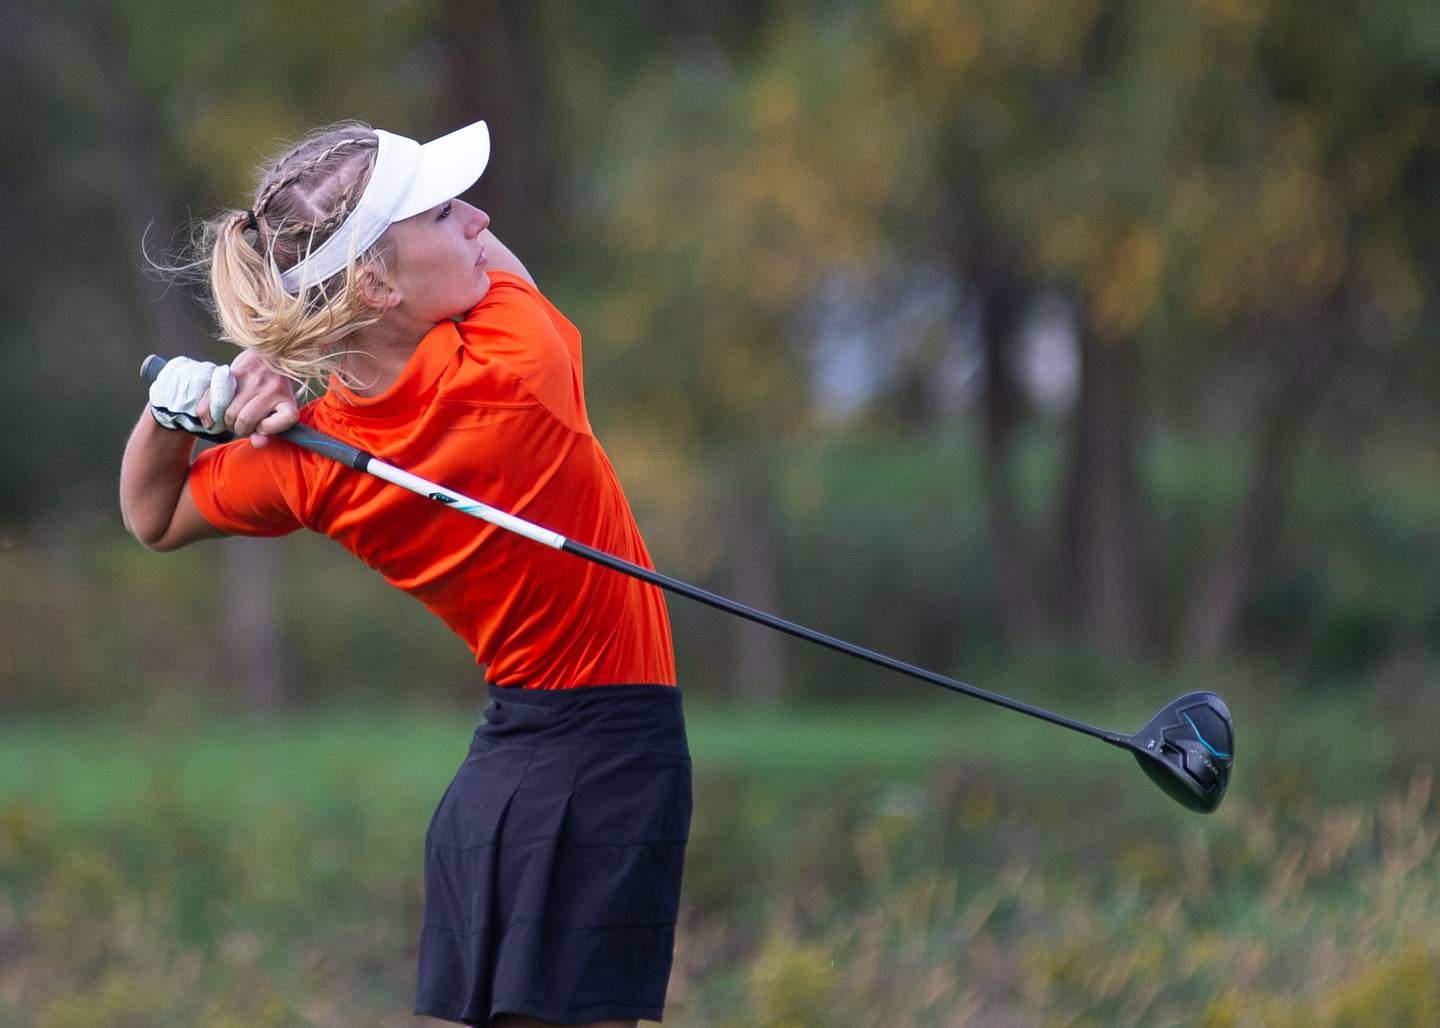 Emily Charles from St. Charles East hits a drive off the No. 1 tee in the Girls Class 2A Belvidere Sectional golf tournament on Monday, Oct. 4, 2021 at Timber Pointe Golf Club near Poplar Grove.